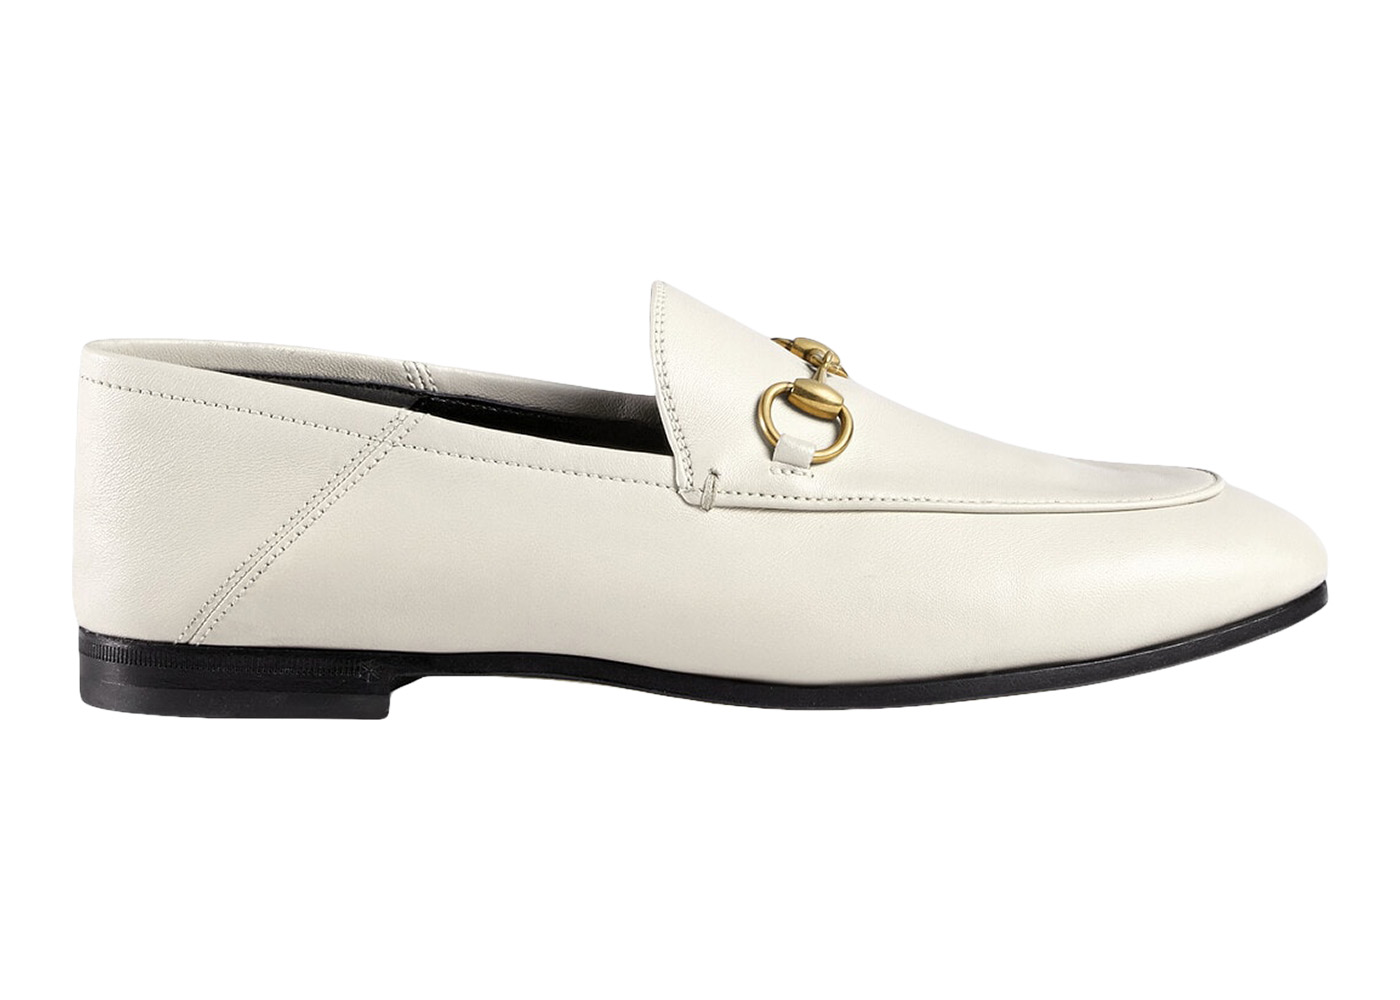 Gucci logo-plaque leather loafers - White